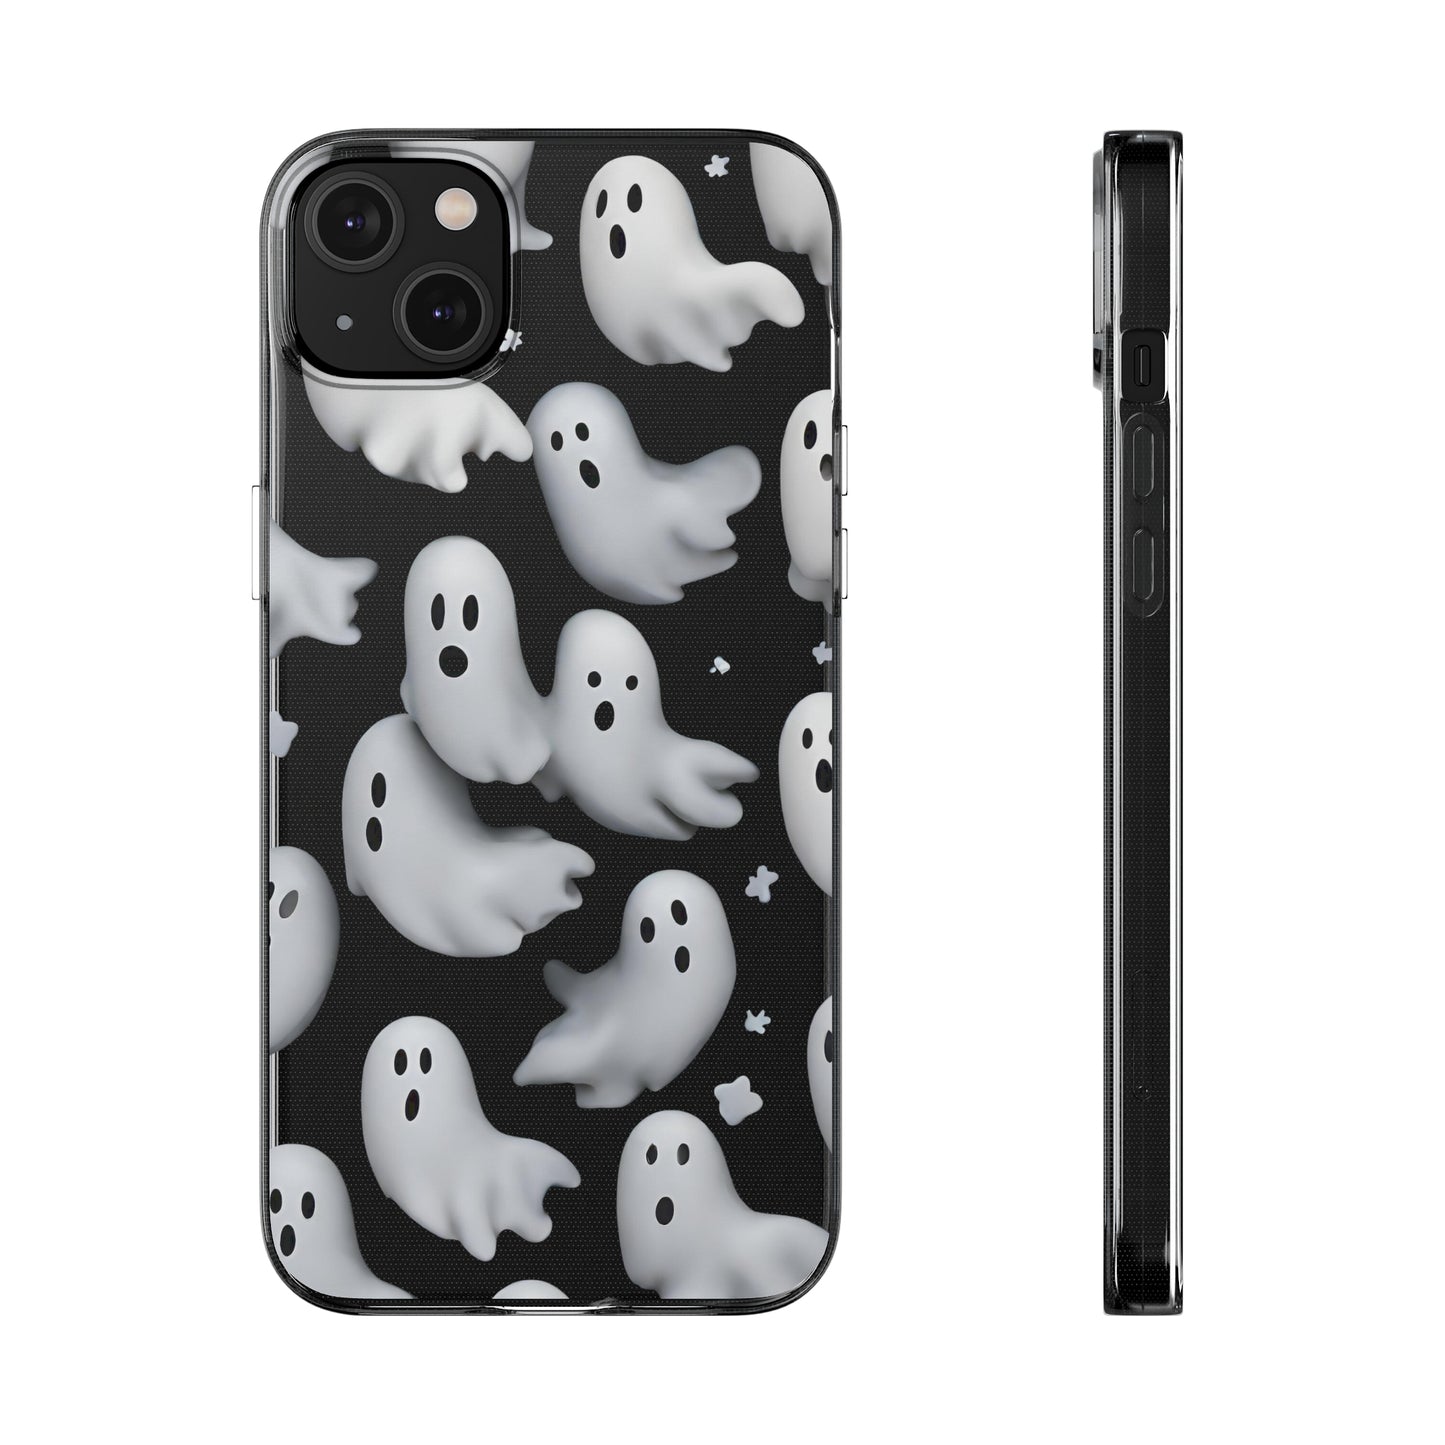 3D Ghosts on Clear Background iPhone Case, Halloween Ghost Phone Case,  Clear Phone Case